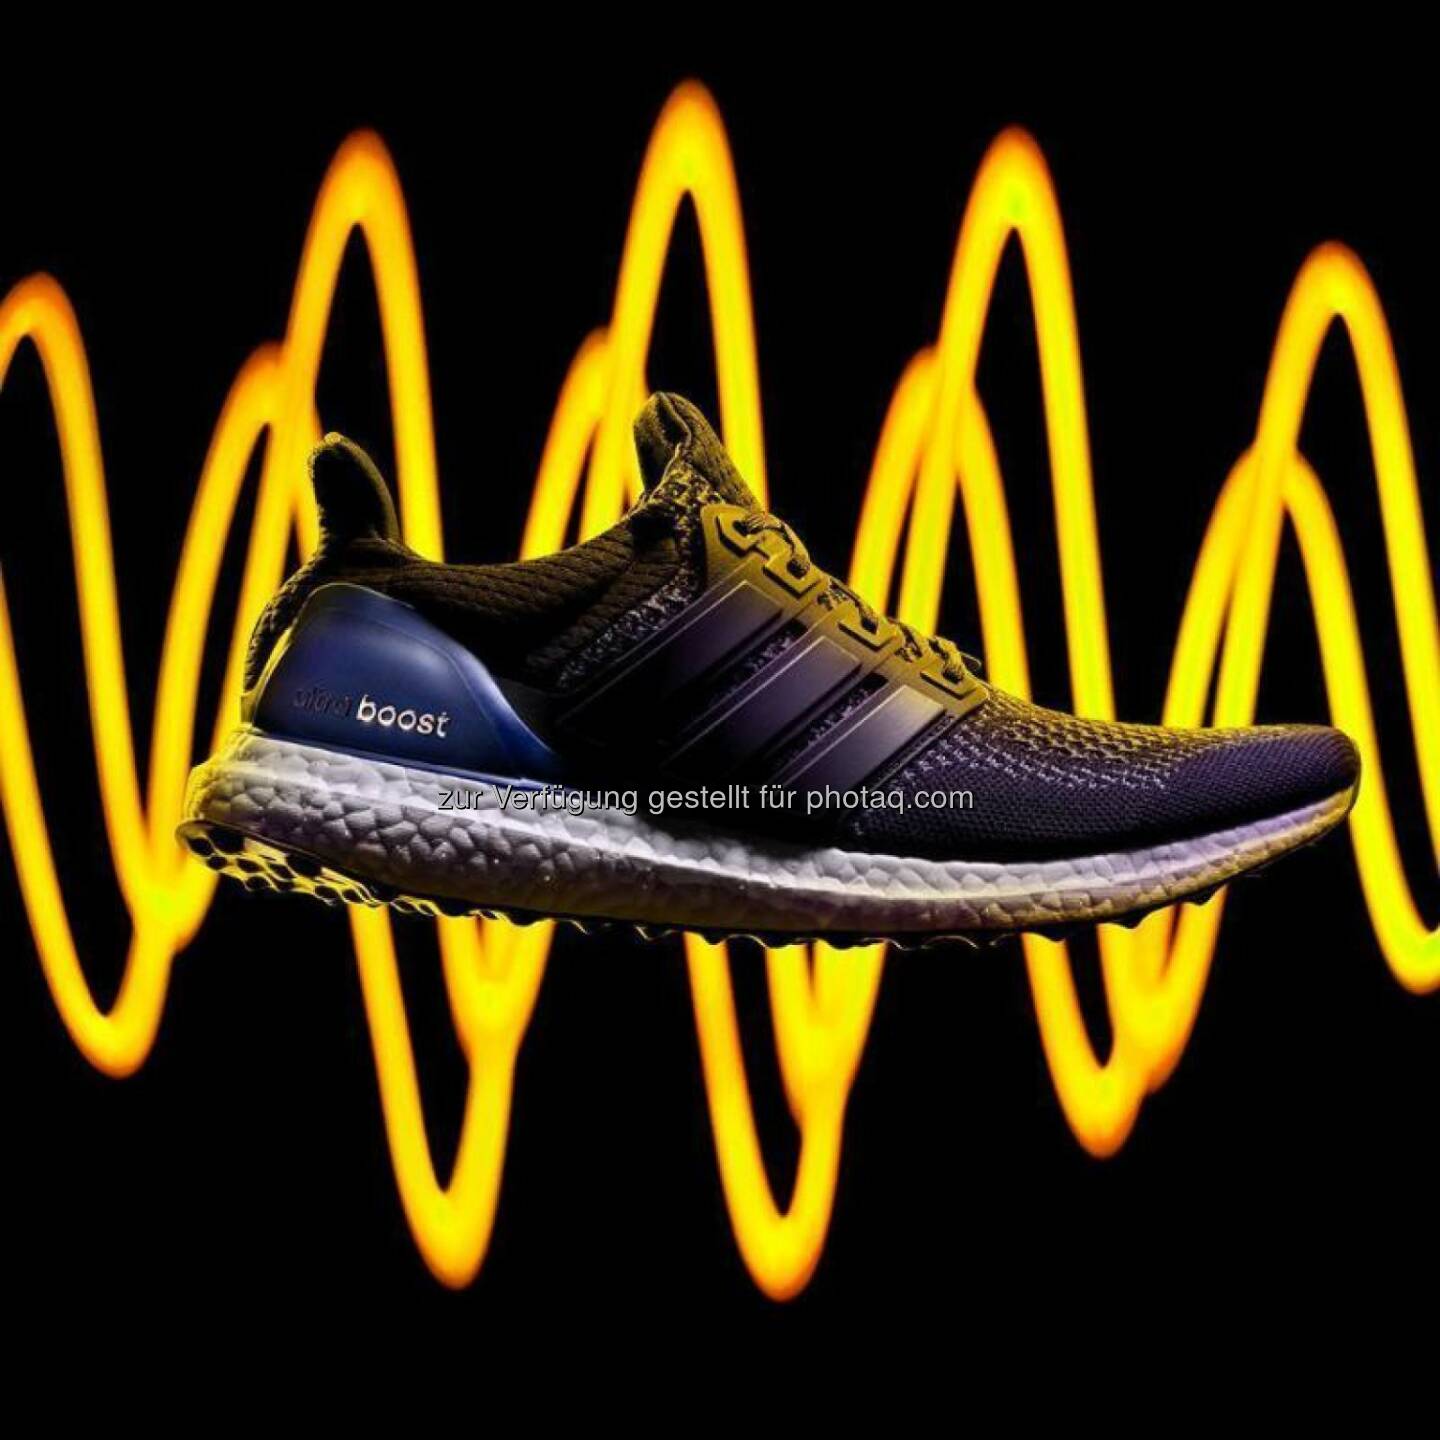 adidas unveils Ultra Boost Join the revolution #ultraboost